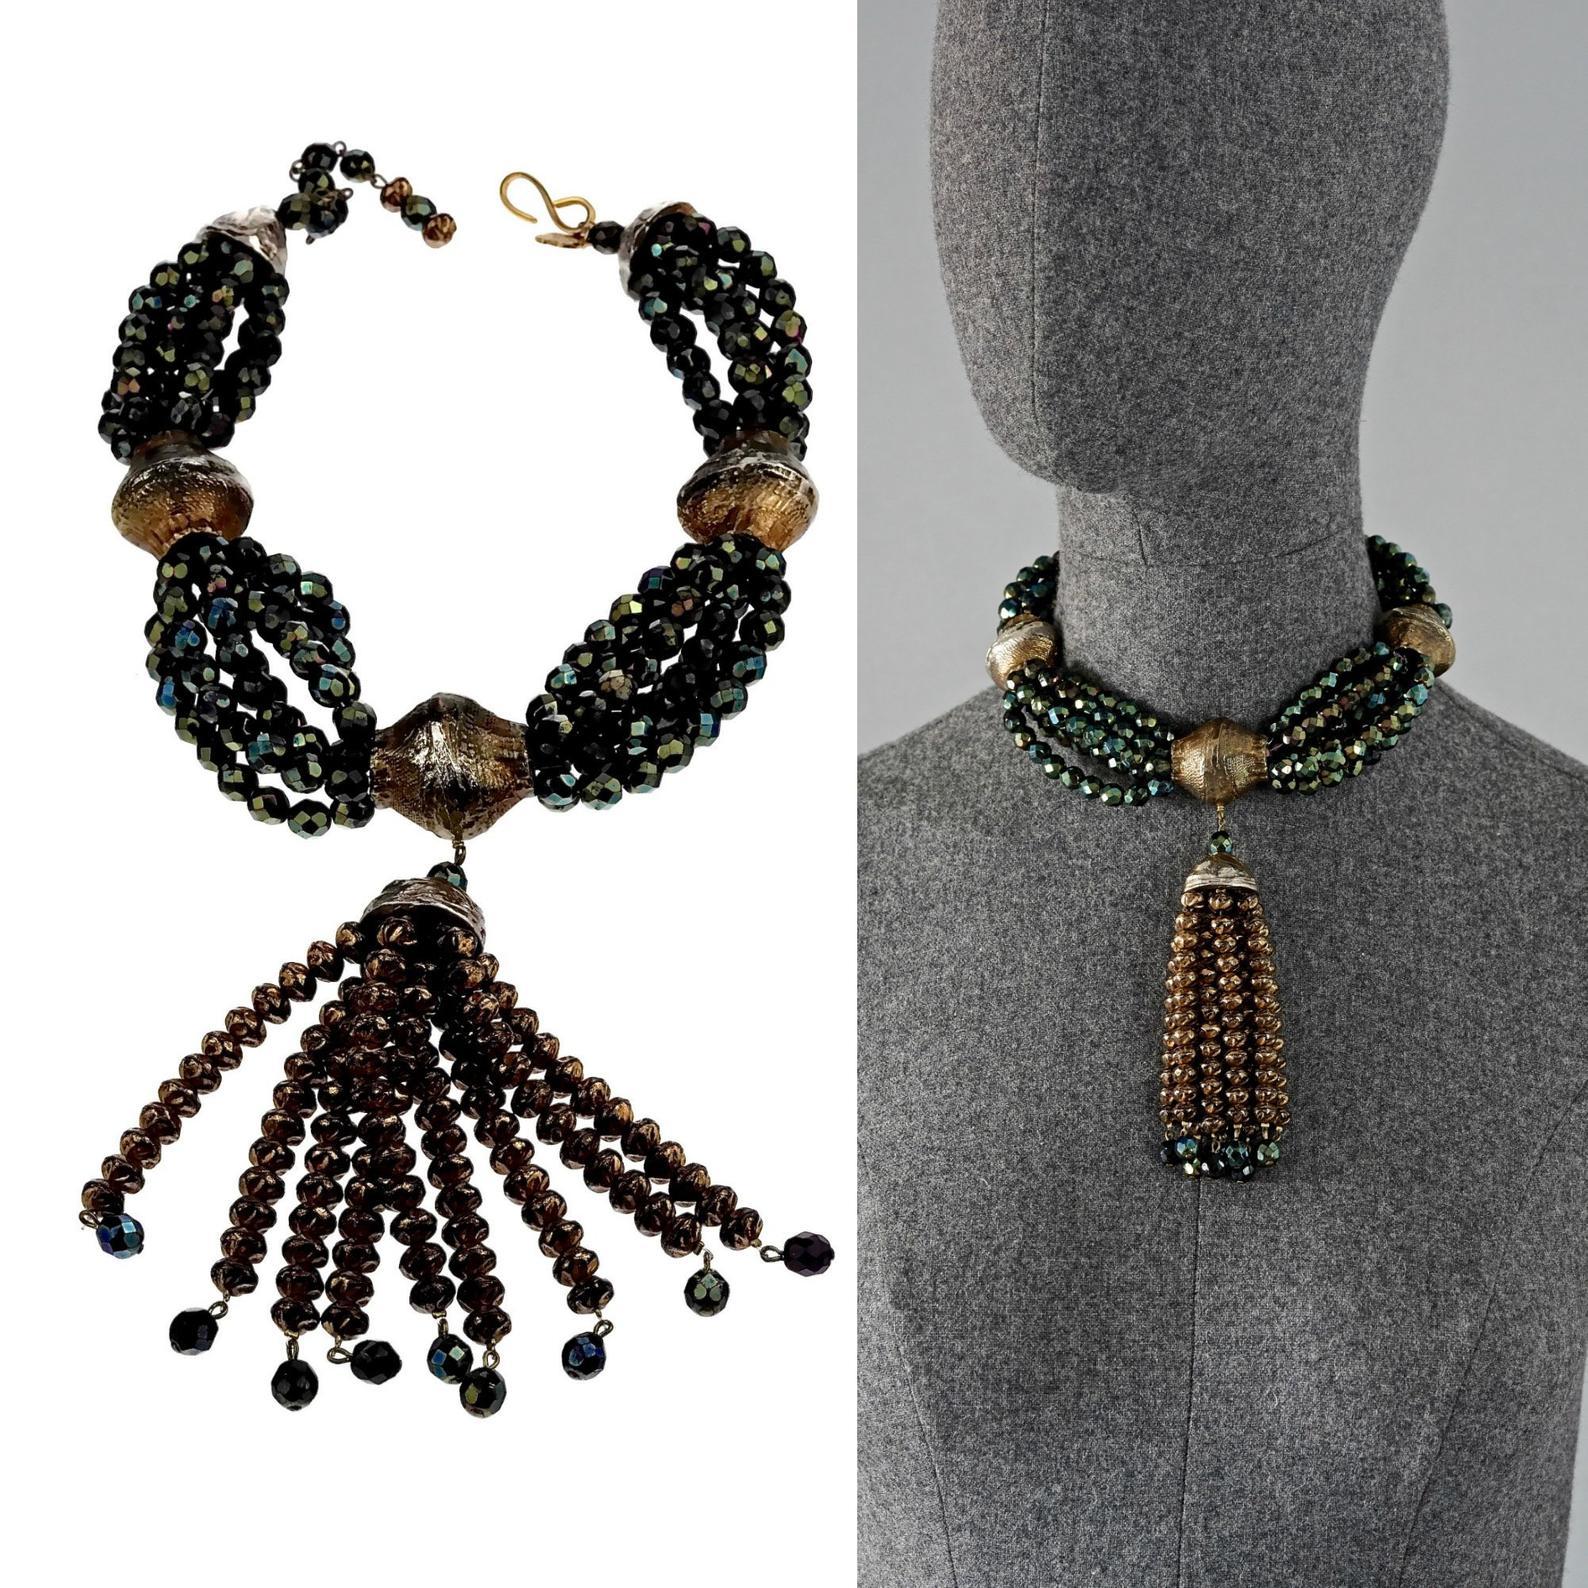 Vintage YVES SAINT LAURENT Ysl Brutalist Tassel Bundle Iridescent Crystal Necklace

Measurements:
Height: 5.51 inches (14 cm)
Wearable Length: 15.35 inches to 17.32 inches (39 cm to 44 cm)

Features:
- 100% Authentic YVES SAINT LAURENT.
- Brutalist